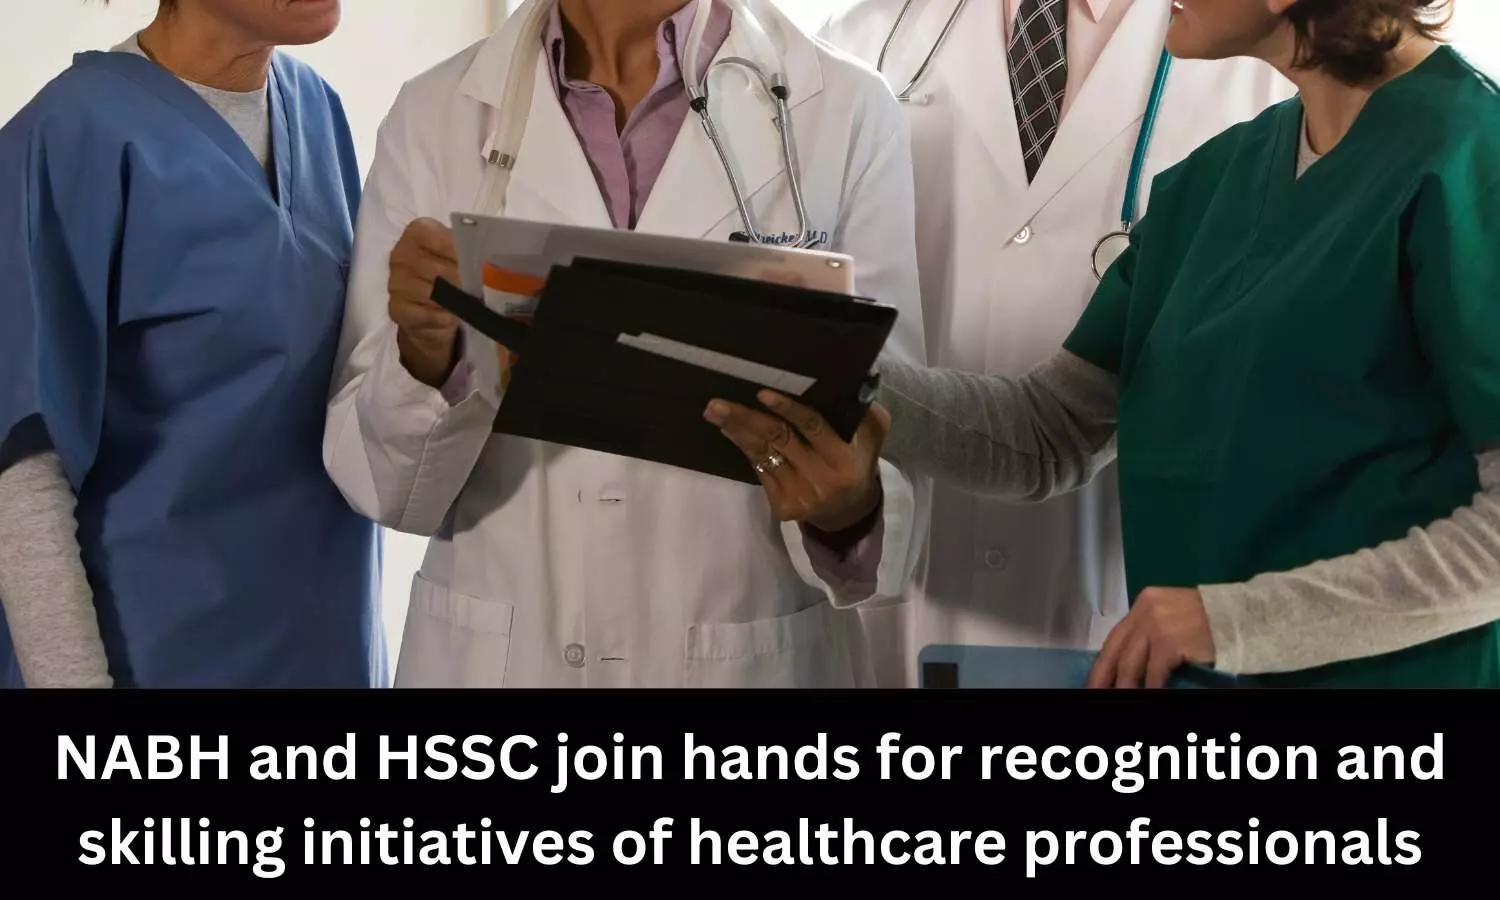 HSSC, NABH collaborate for recognition, skilling initiatives of healthcare professionals